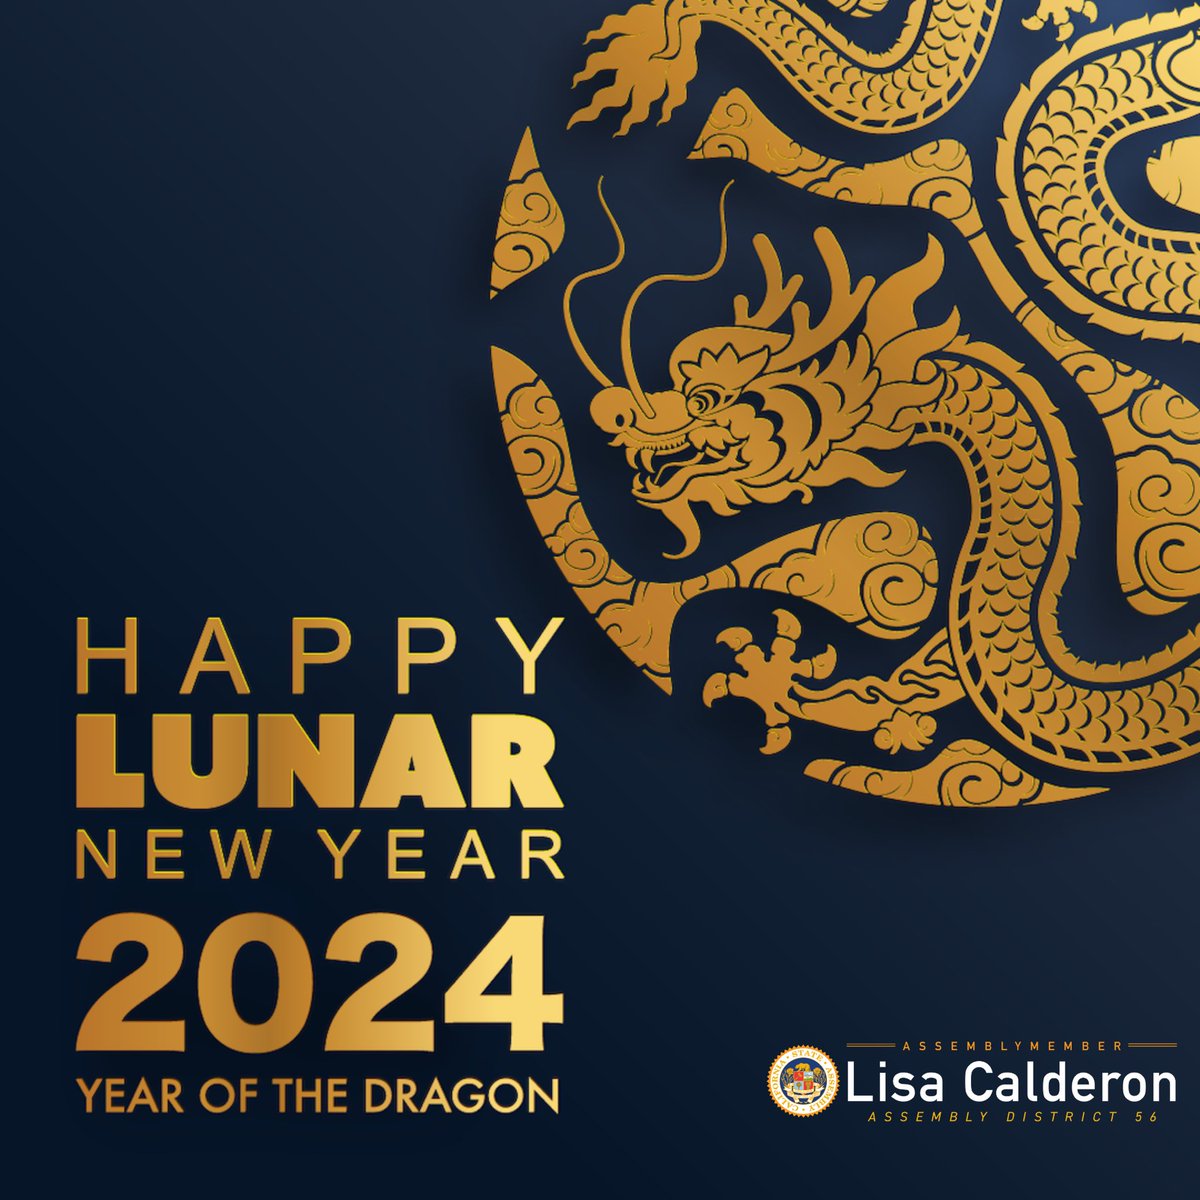 Happy Lunar New Year! Wishing the residents of the 56th Assembly District prosperity and good health in the coming year of the dragon. #YearOfTheDragon